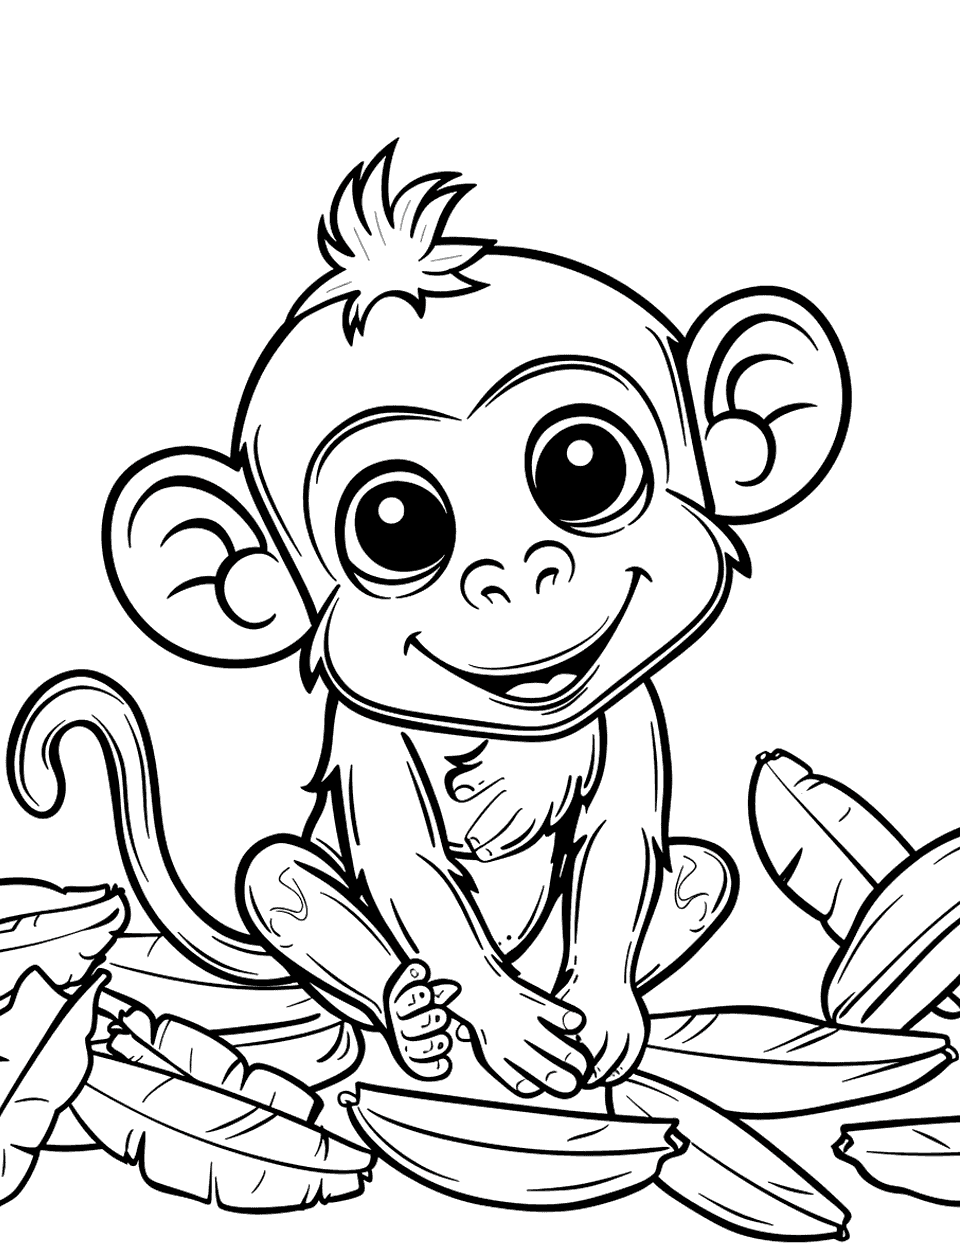 Cute Baby Monkey Coloring Page - A sweet baby monkey sitting and smiling, surrounded by banana peels and leaves.